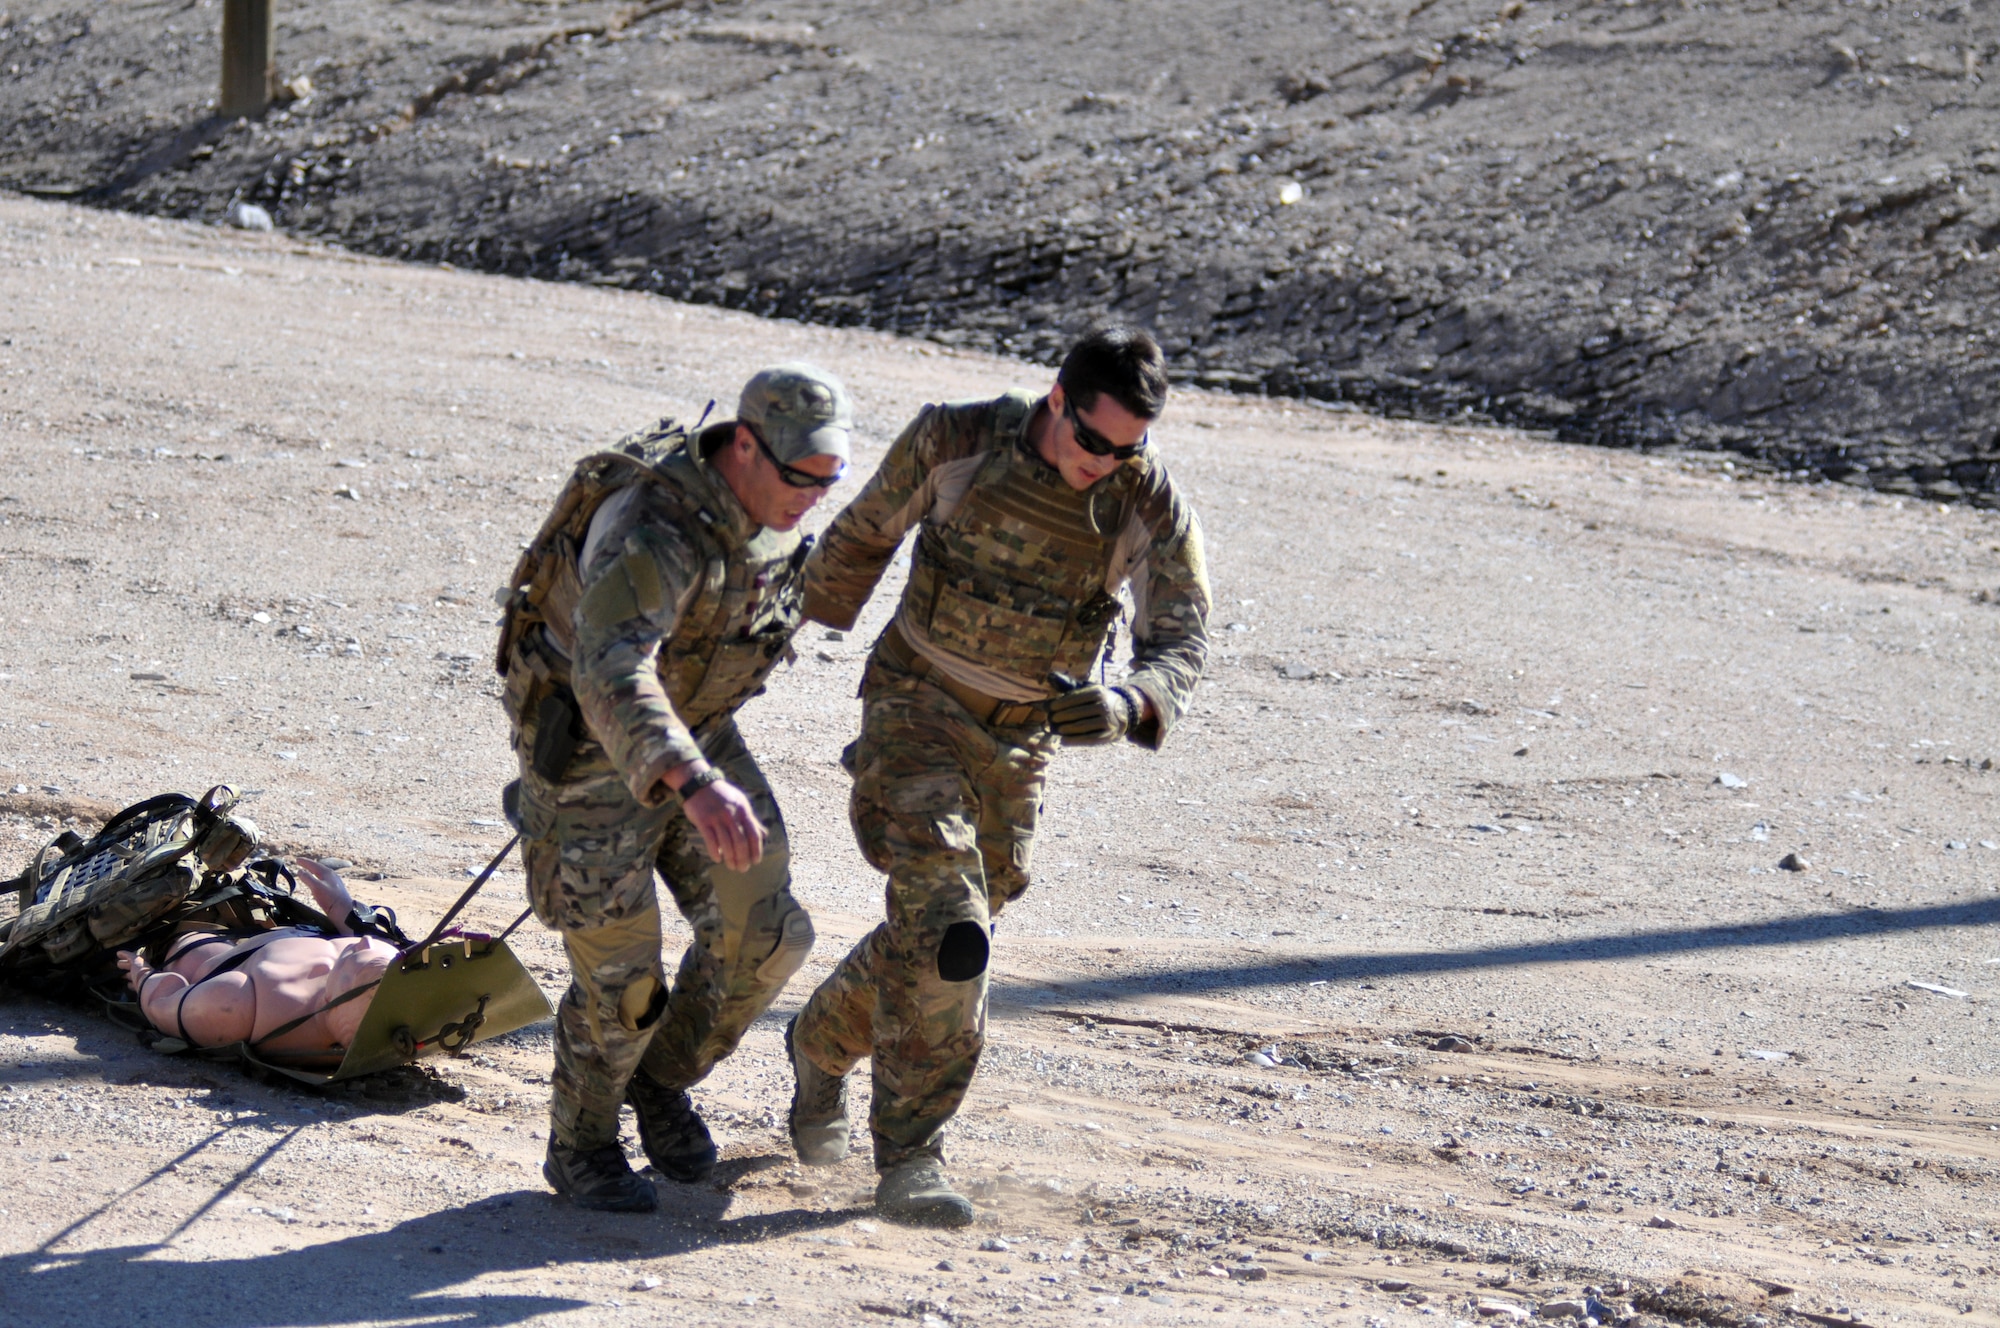 Two pararescuemen drag a patient to safety as part of a stress-shooting and patient-care exercise during the 2014 Guardian Angel Rodeo, Kirtland Air Force Base, New Mexico, September 25, 2014. The rodeo, or competition, was a week-long event that tested the PJs on land navigation skills, high-angel rope rescues, survival techniques, medical skills, weapons operations and overall physical endurance. (U.S. Air Force photo/ Tech. Sgt. Katie Spencer)